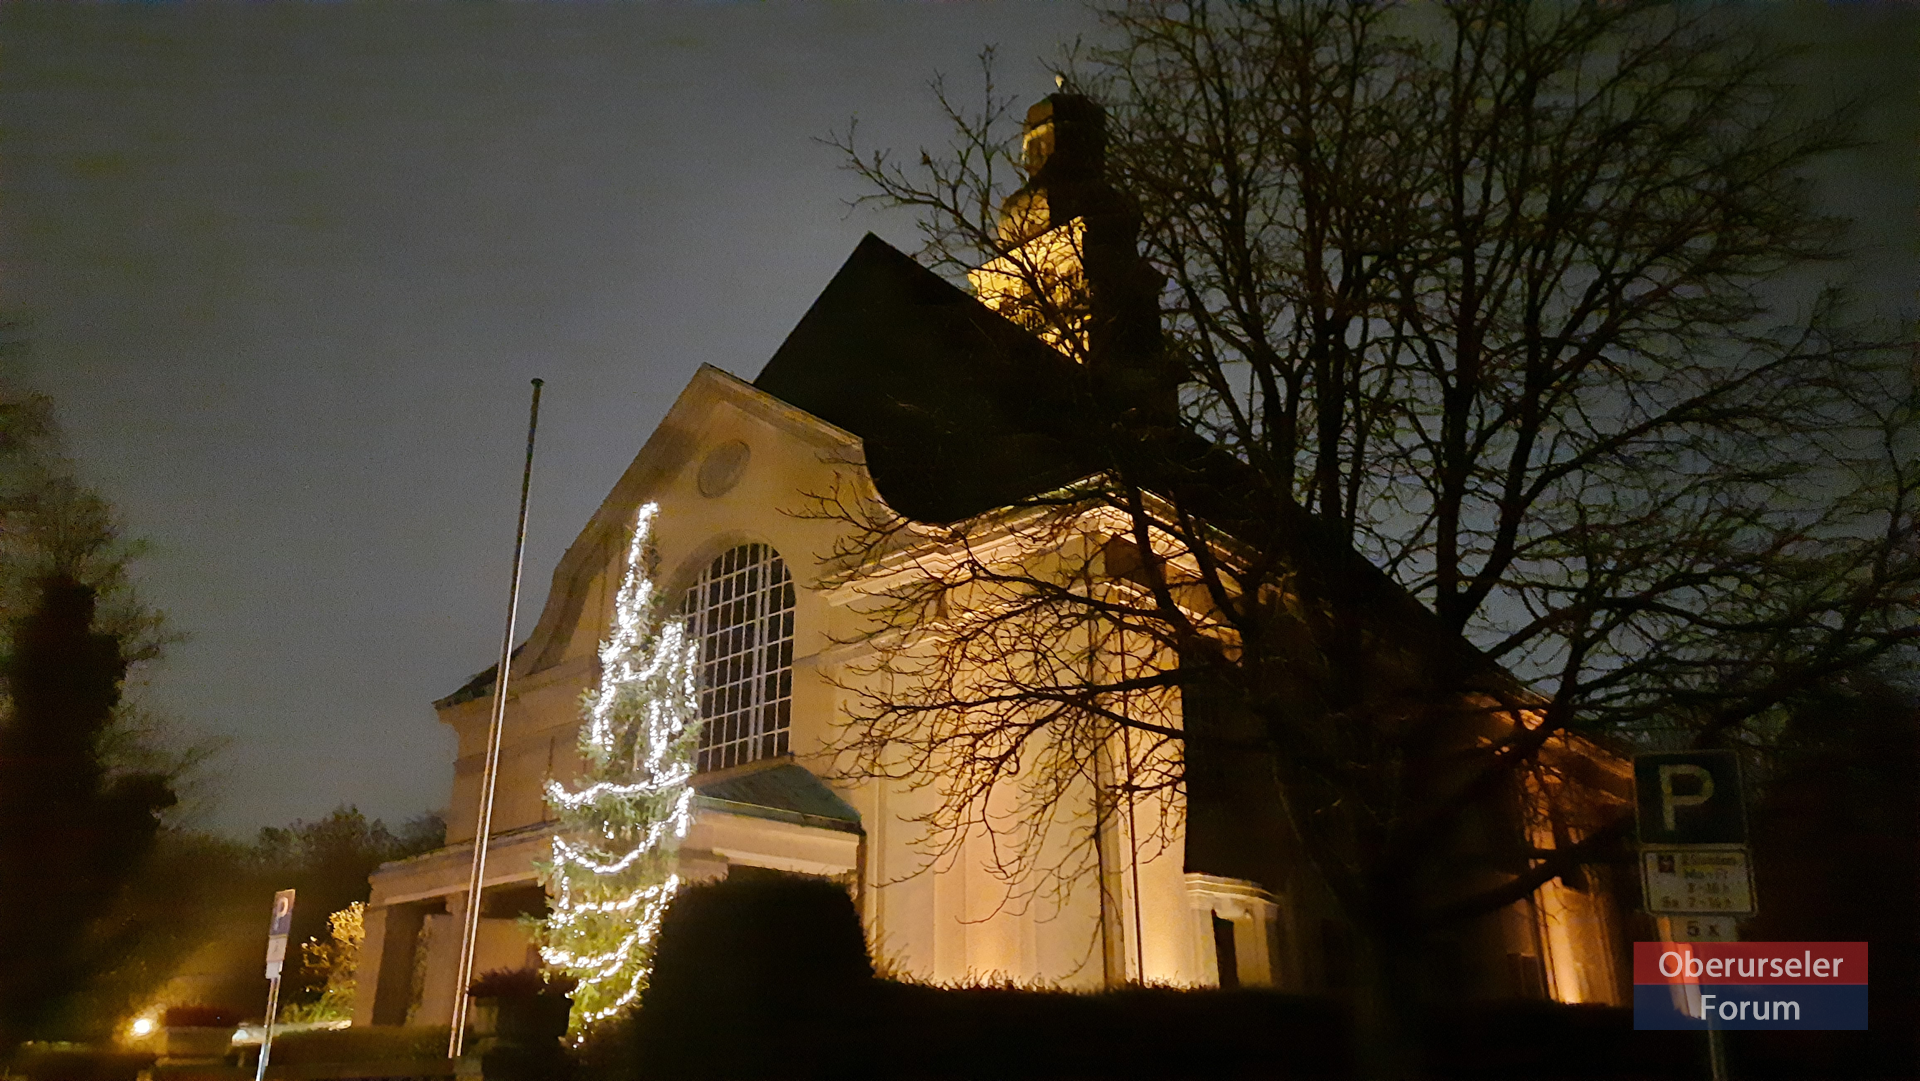 The Christus Kirche in Oberursel lit up at night